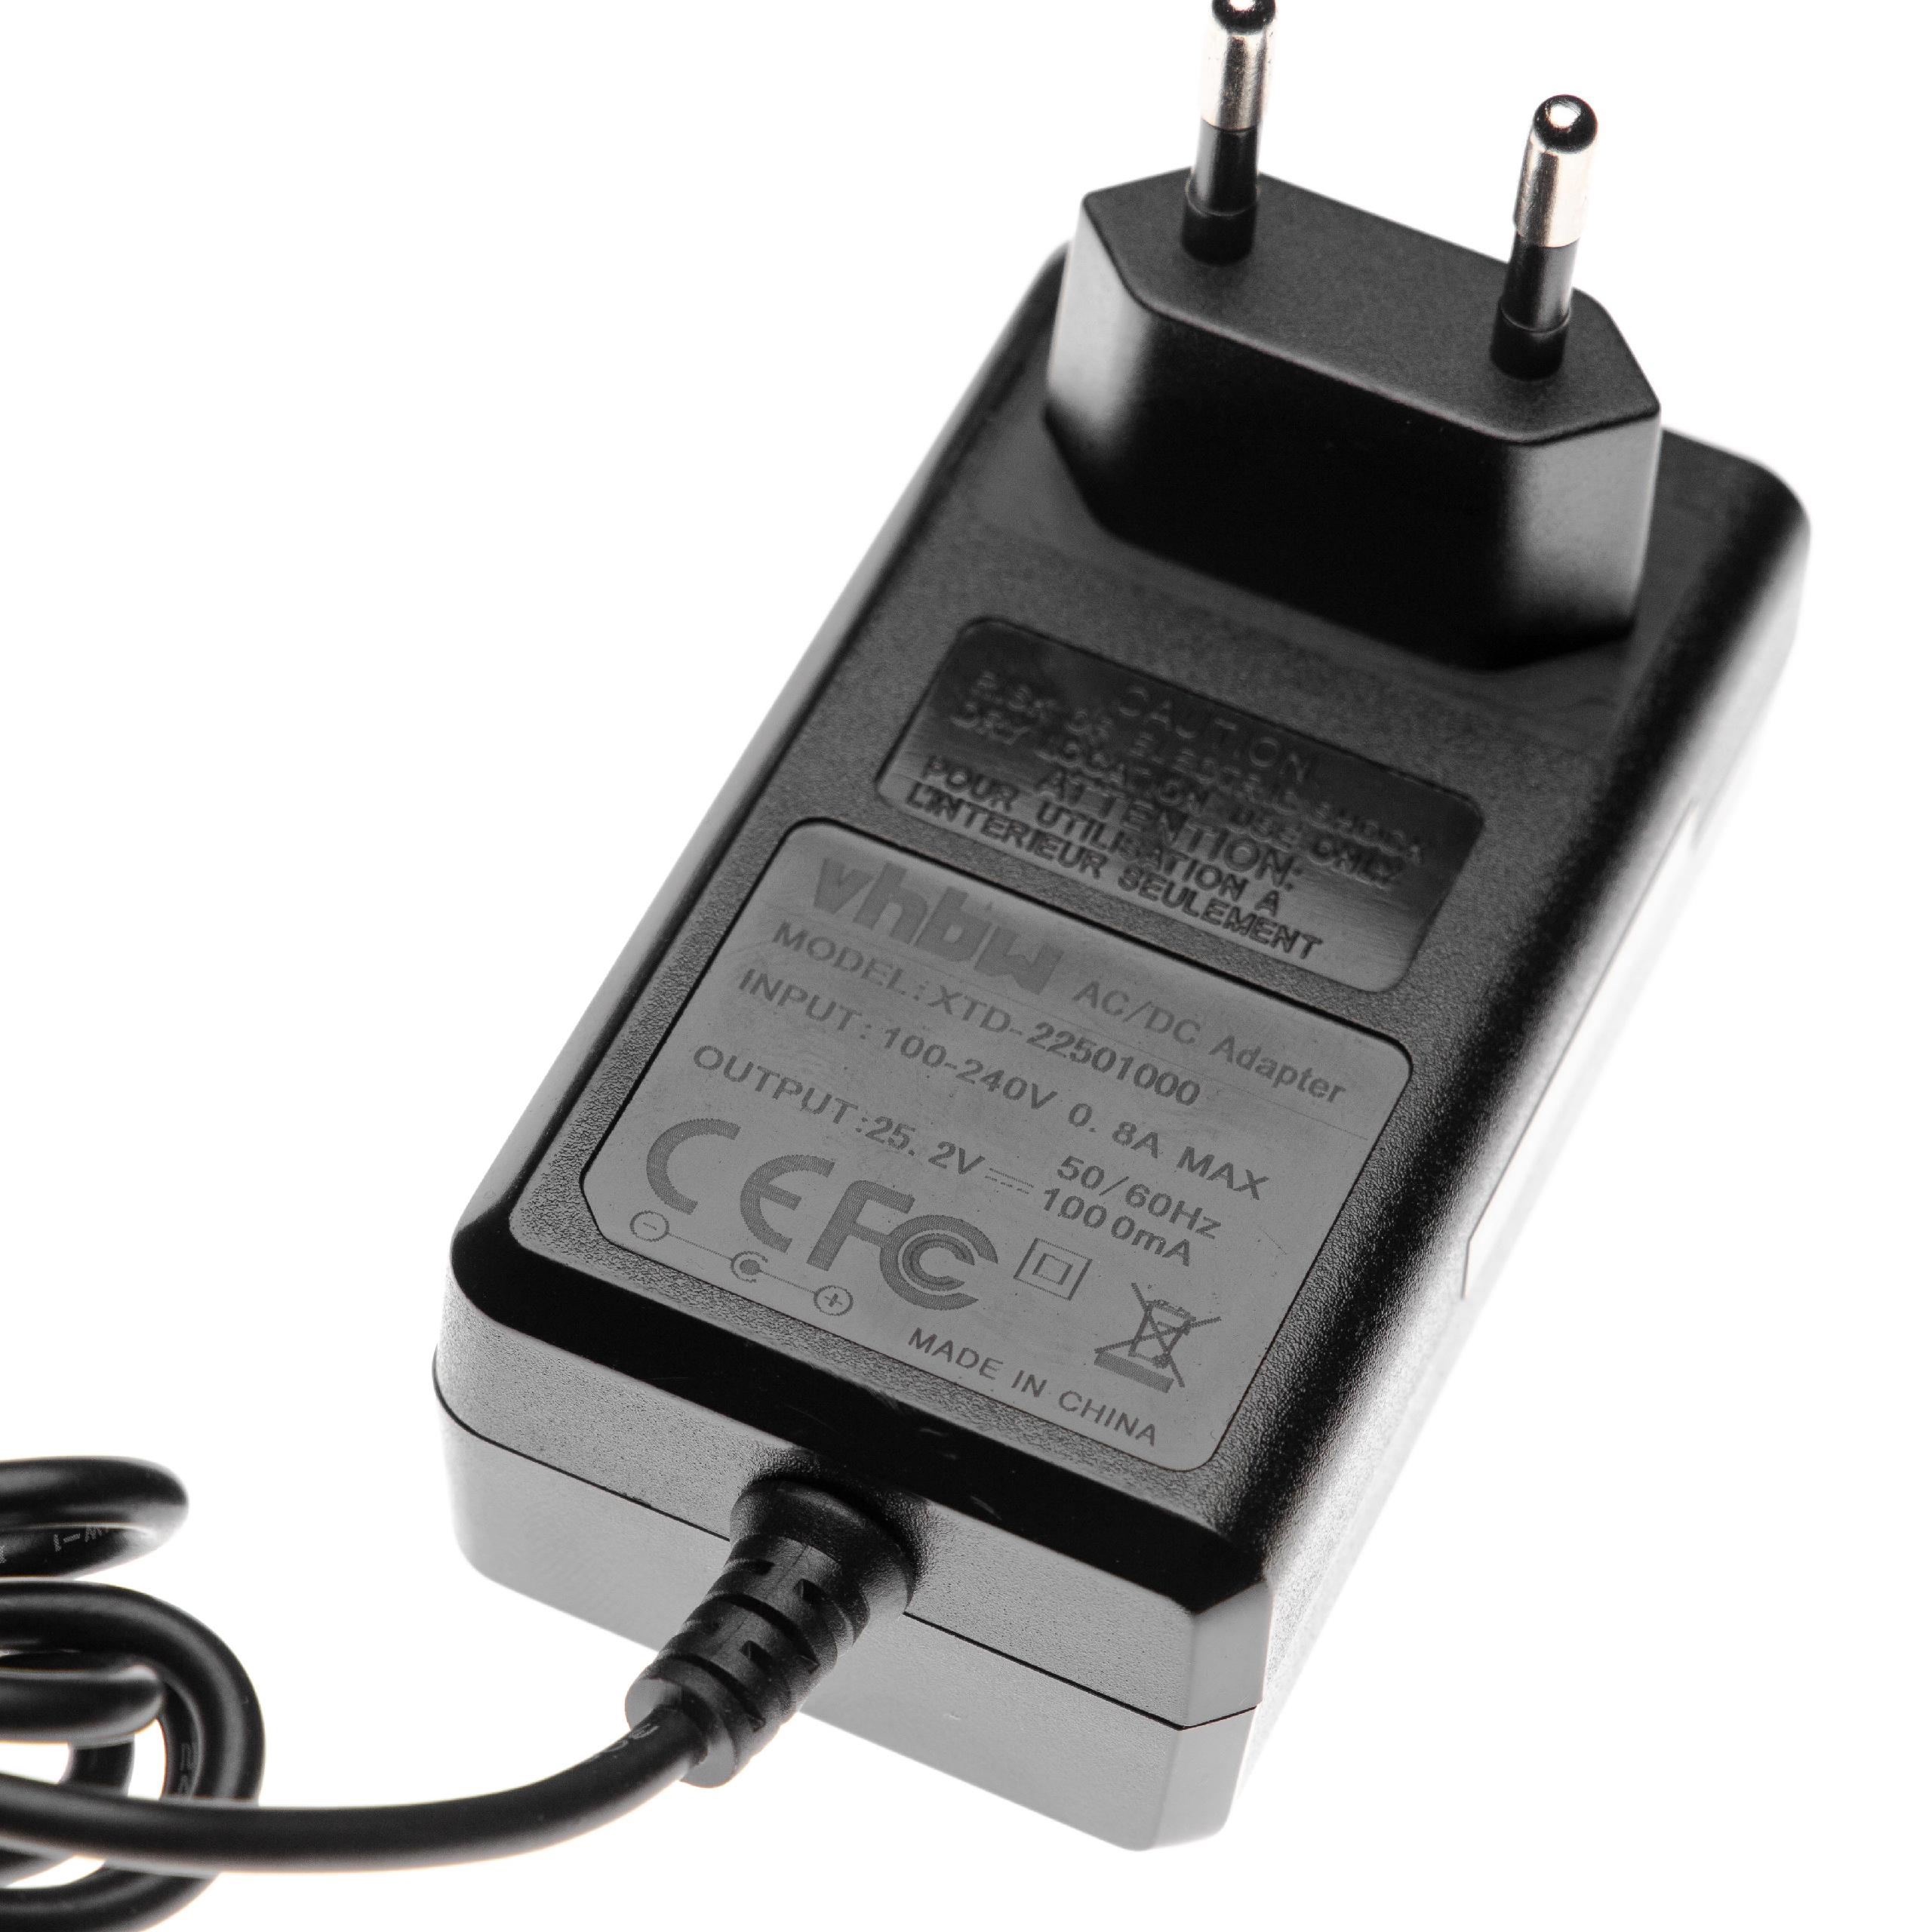 Mains Power Adapter suitable for Devices with Li-Ion battery packs 21.6 V - 22.2 V - 120 cm 25.2 V / 1 A